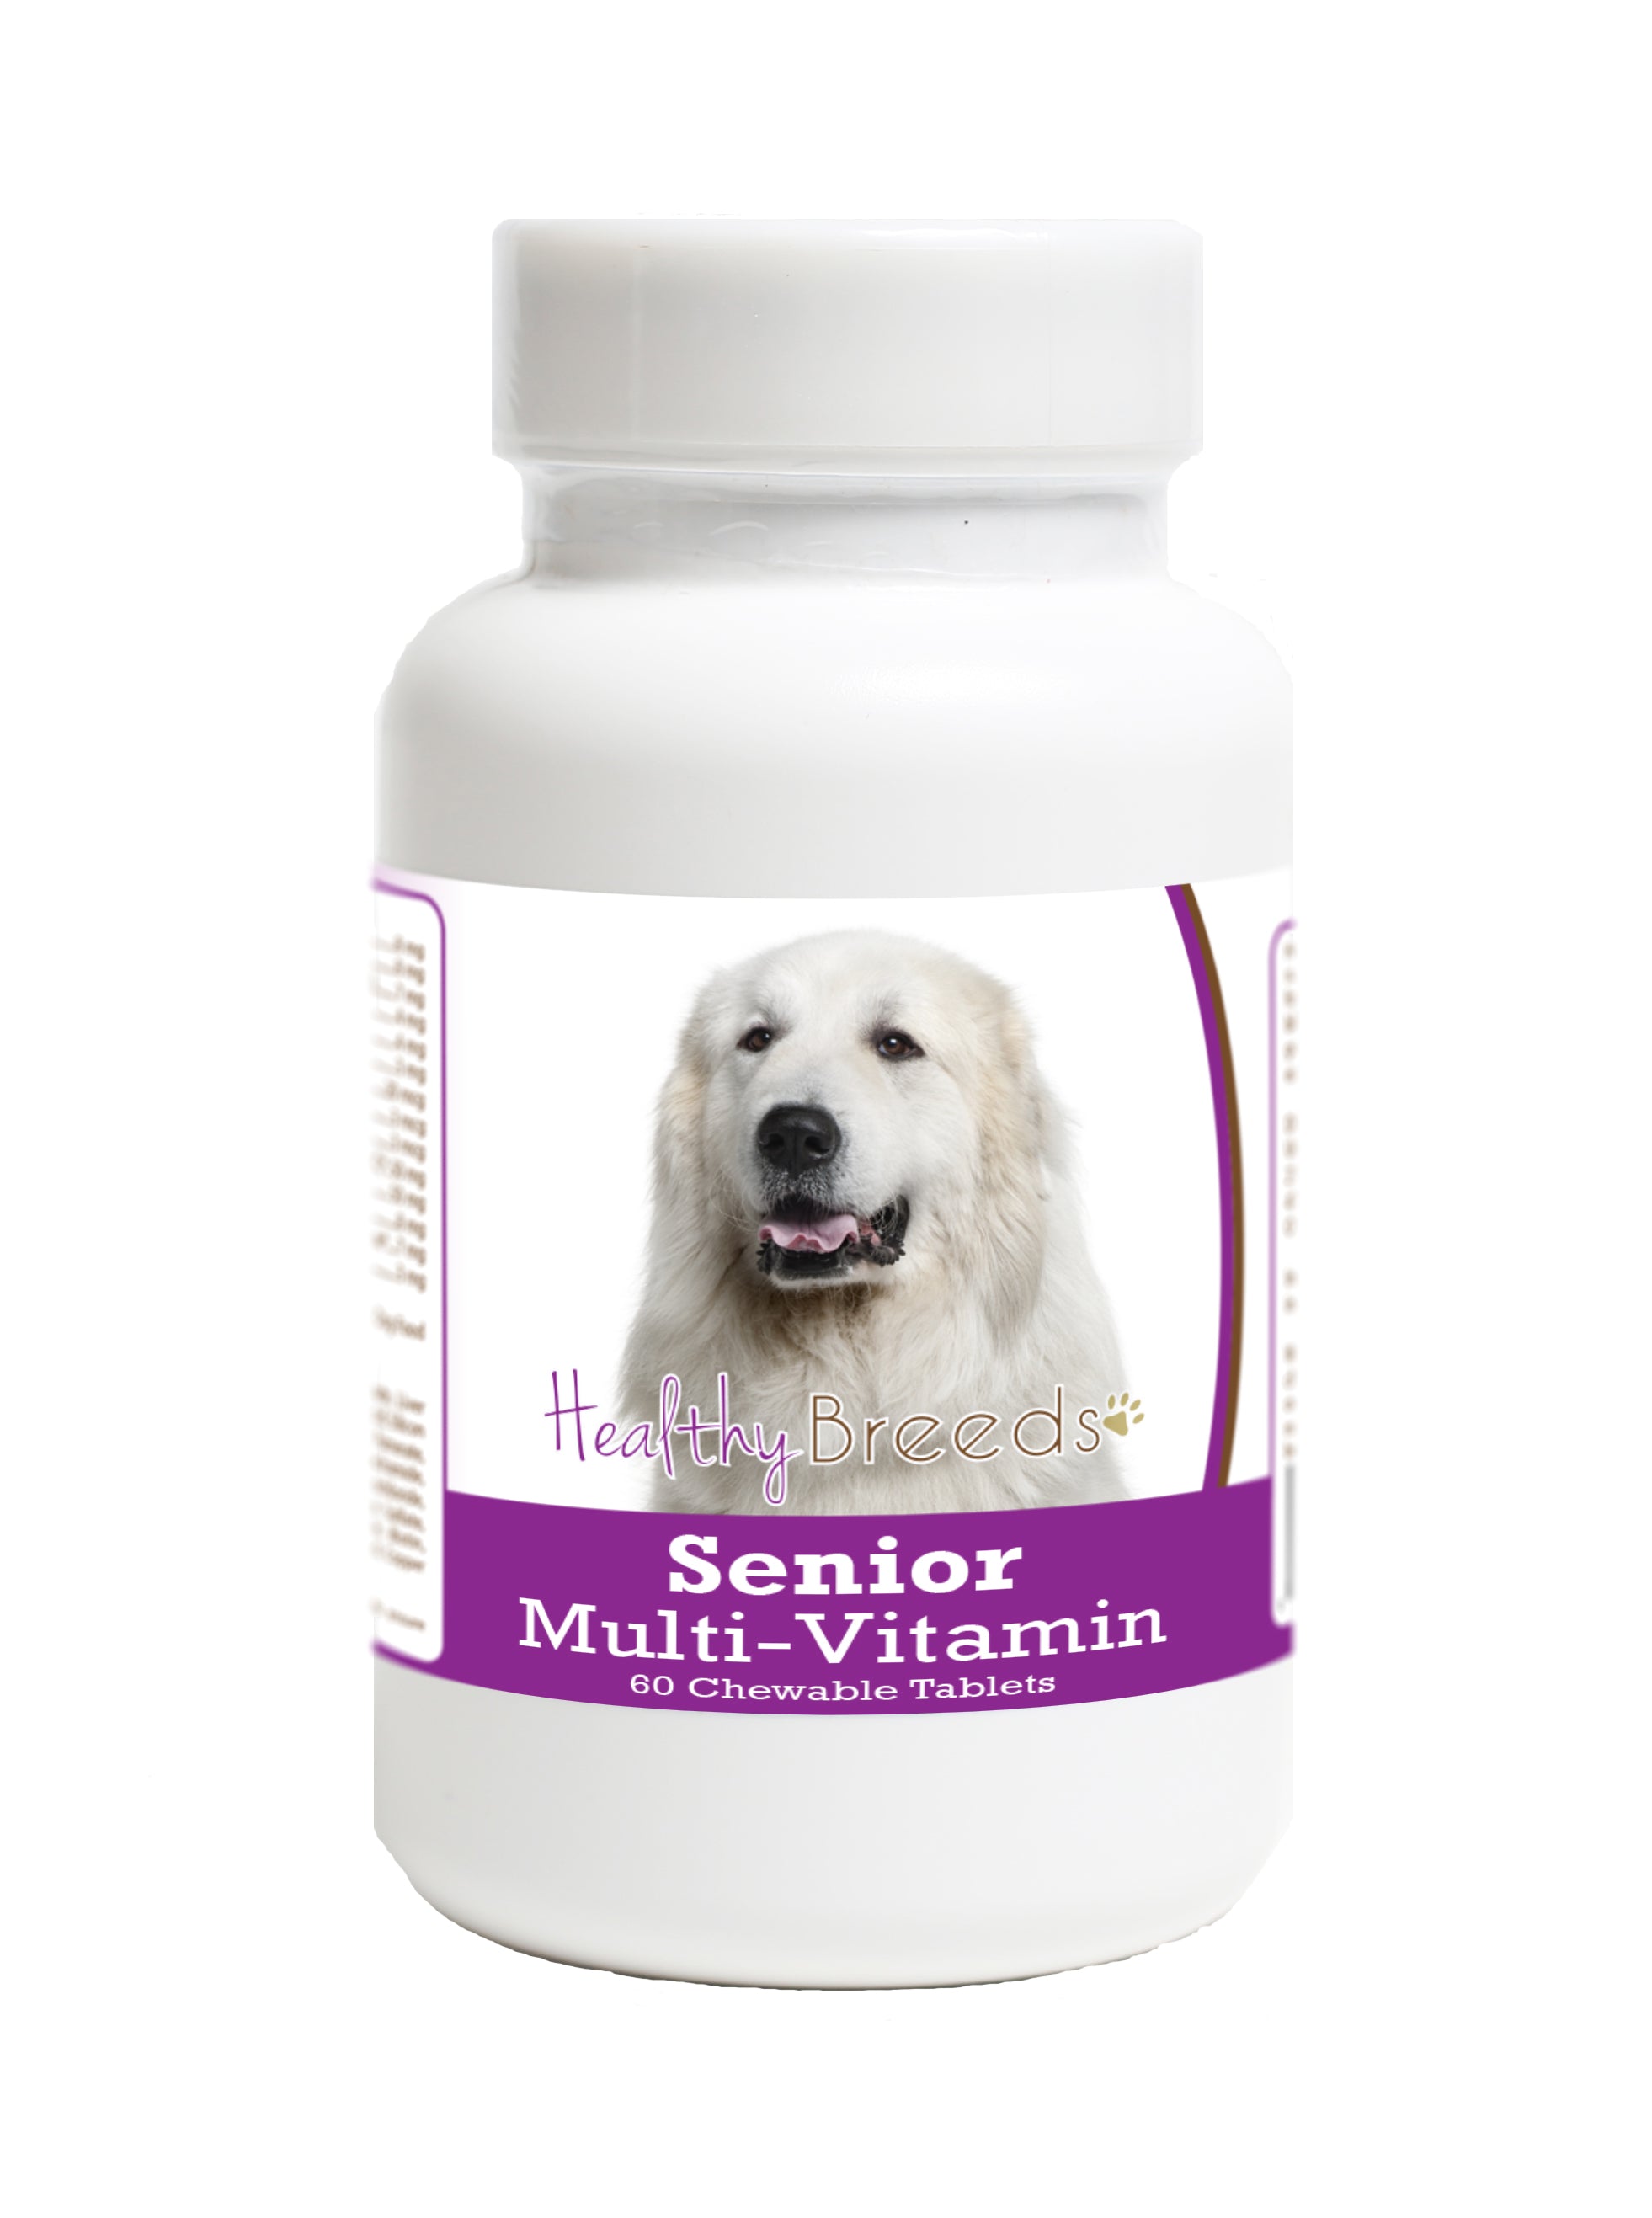 Great Pyrenees Senior Dog Multivitamin Tablets 60 Count